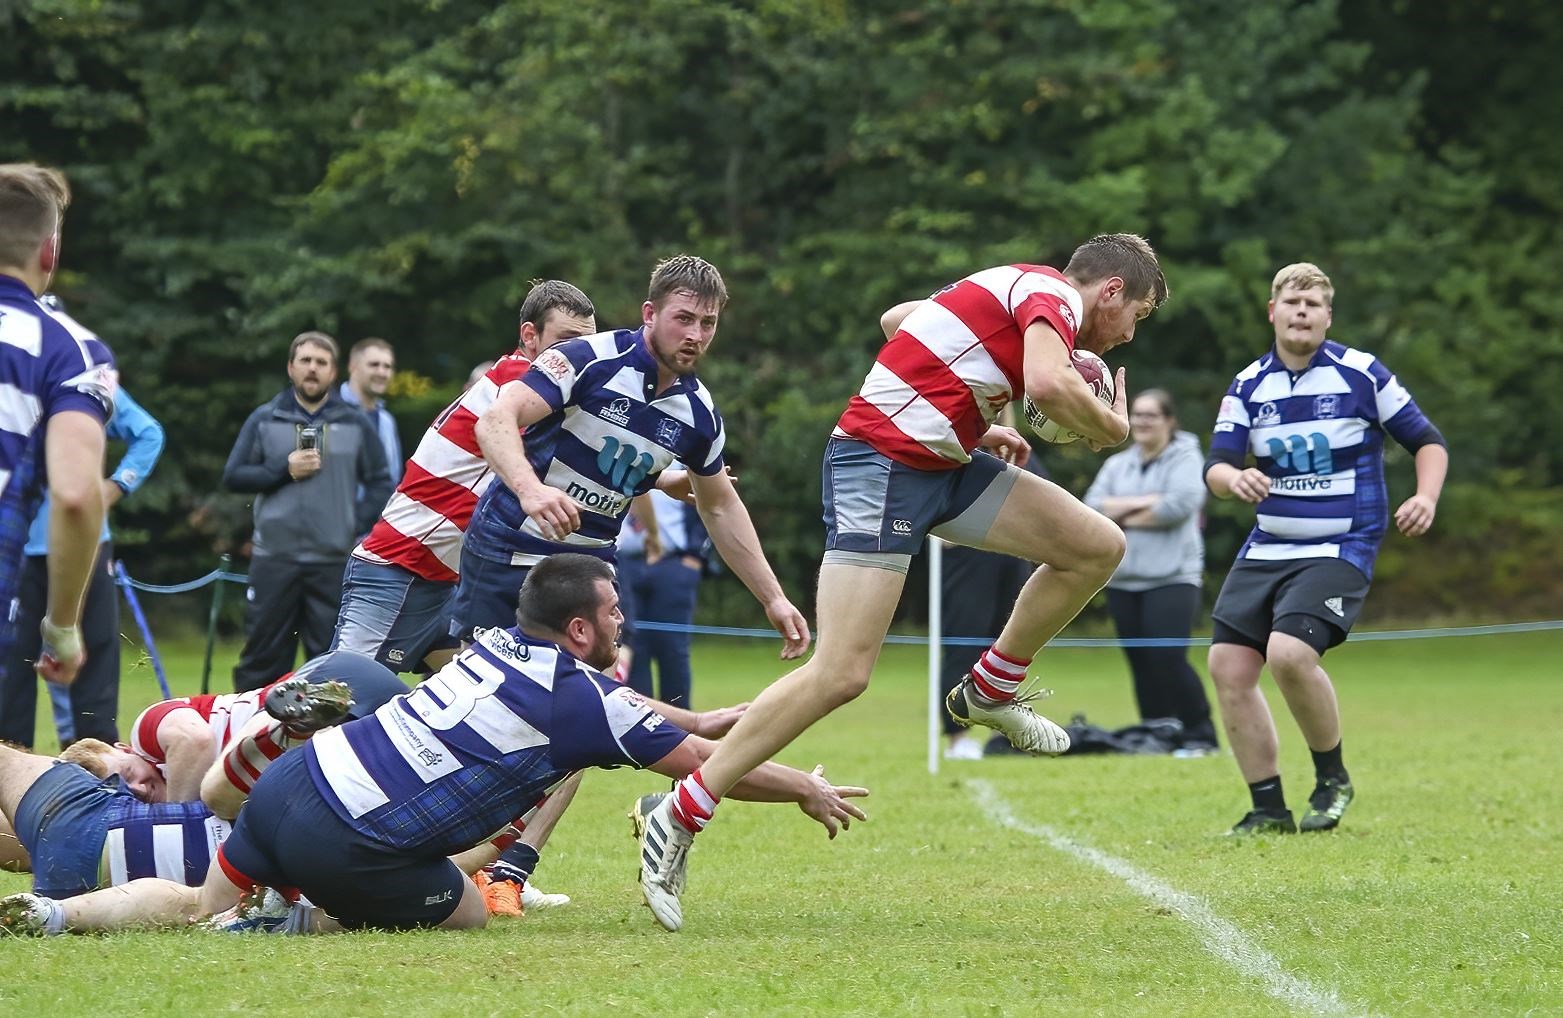 Double try scorer Stewart Bright gets ready to score for Moray. Photo: John MacGregor.